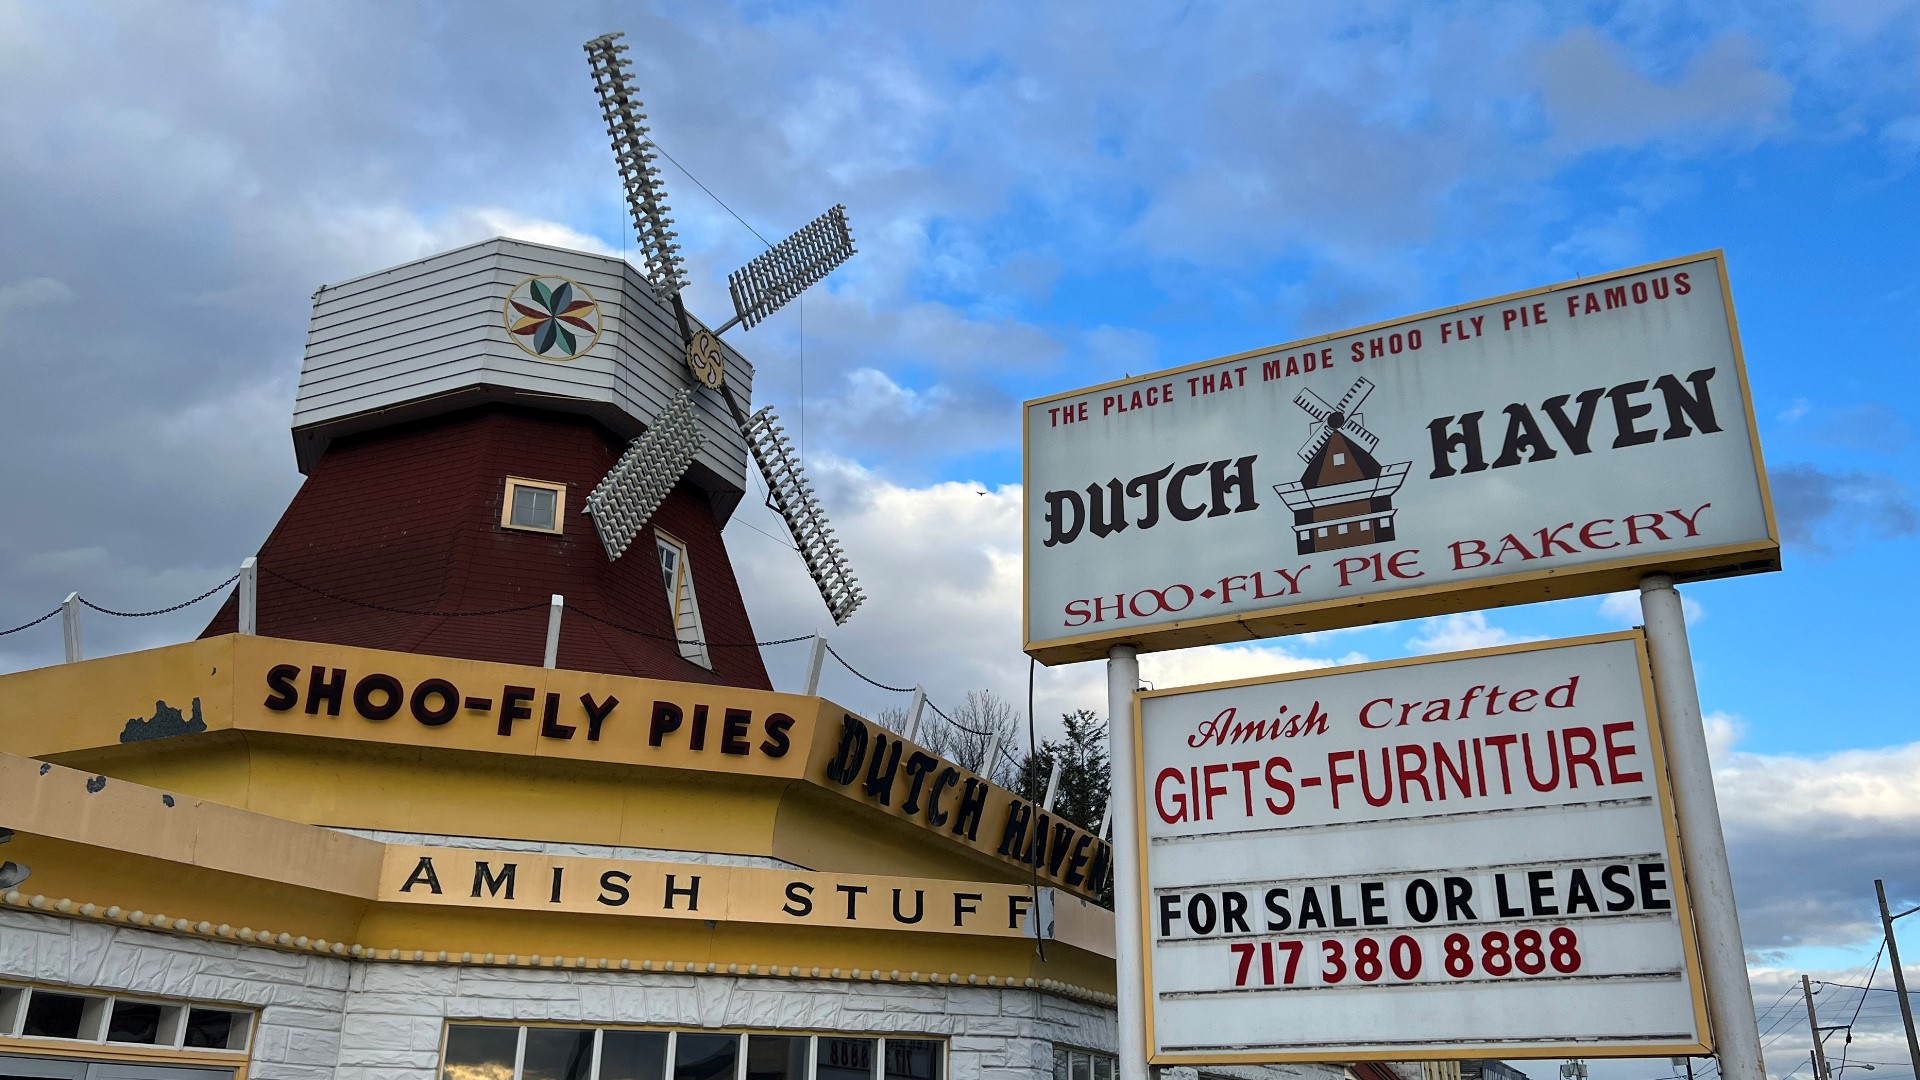 A landmark tourist attraction in Lancaster County is on the market after decades of serving up delicious shoo-fly pies.